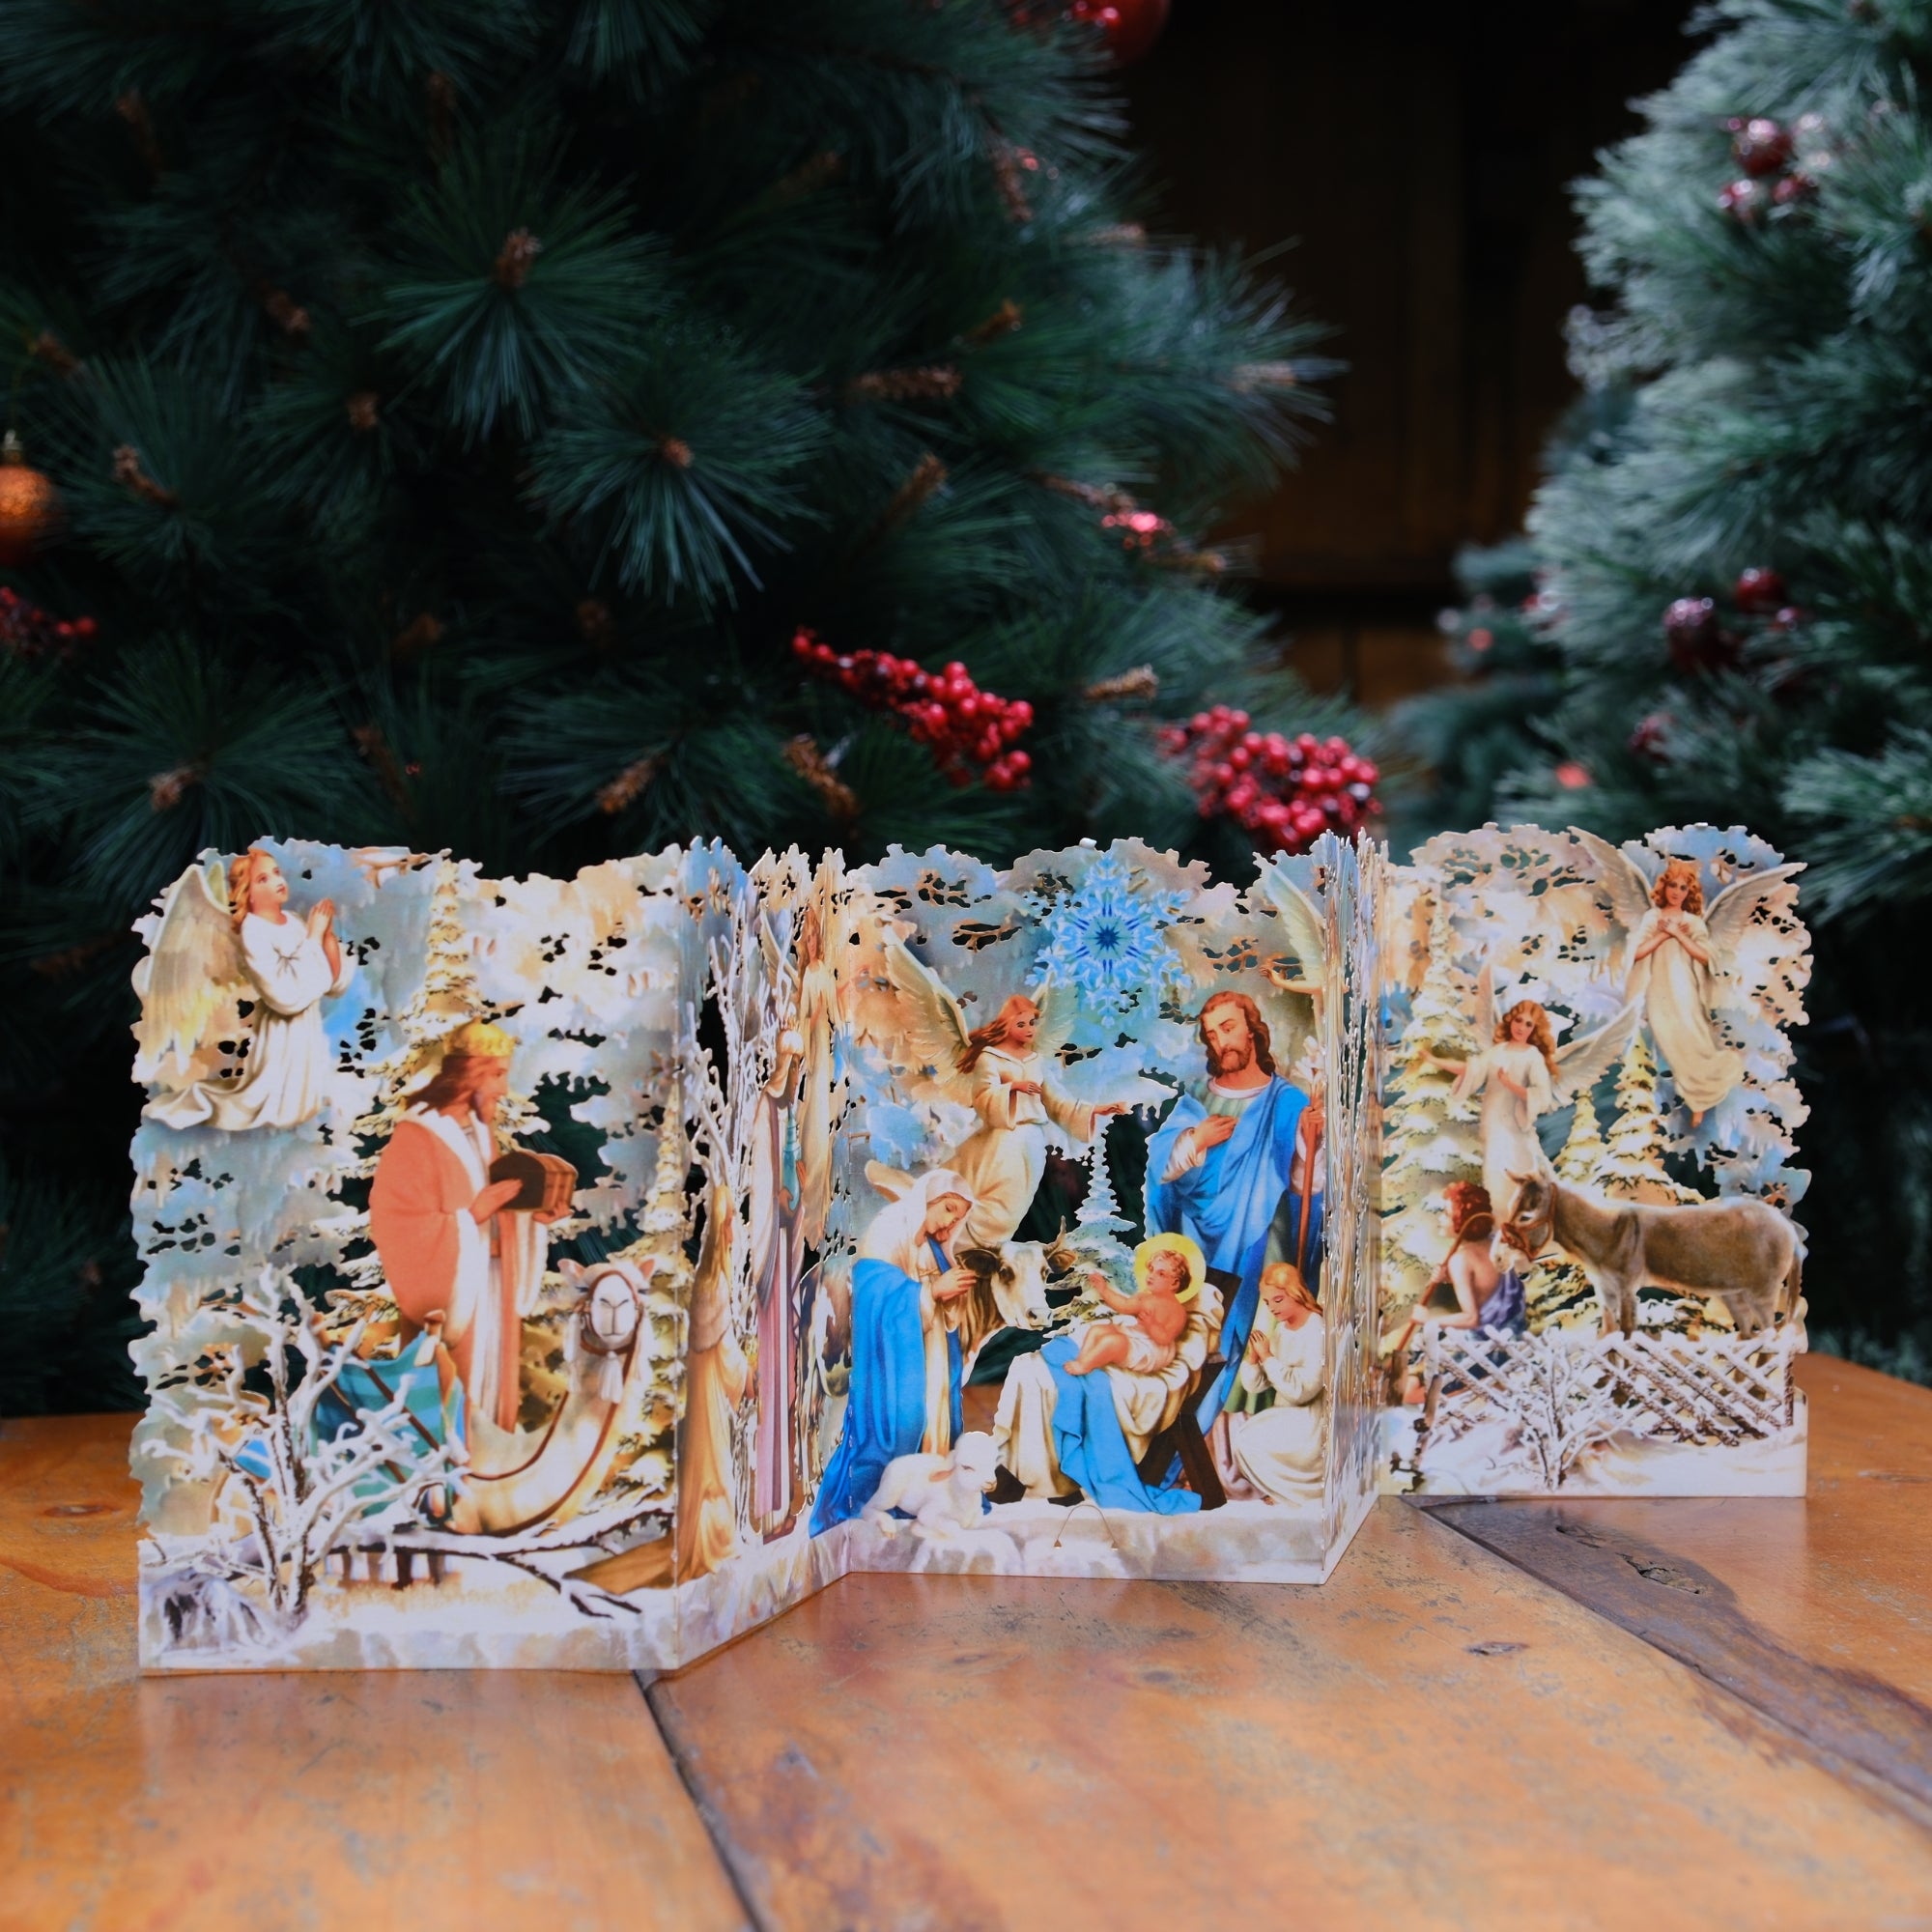 Decoration Greeting Card Merry Christmas Greeting Card Religious Christmas Nativity Scene, Christmas Decoration, Christmas themes, Holiday